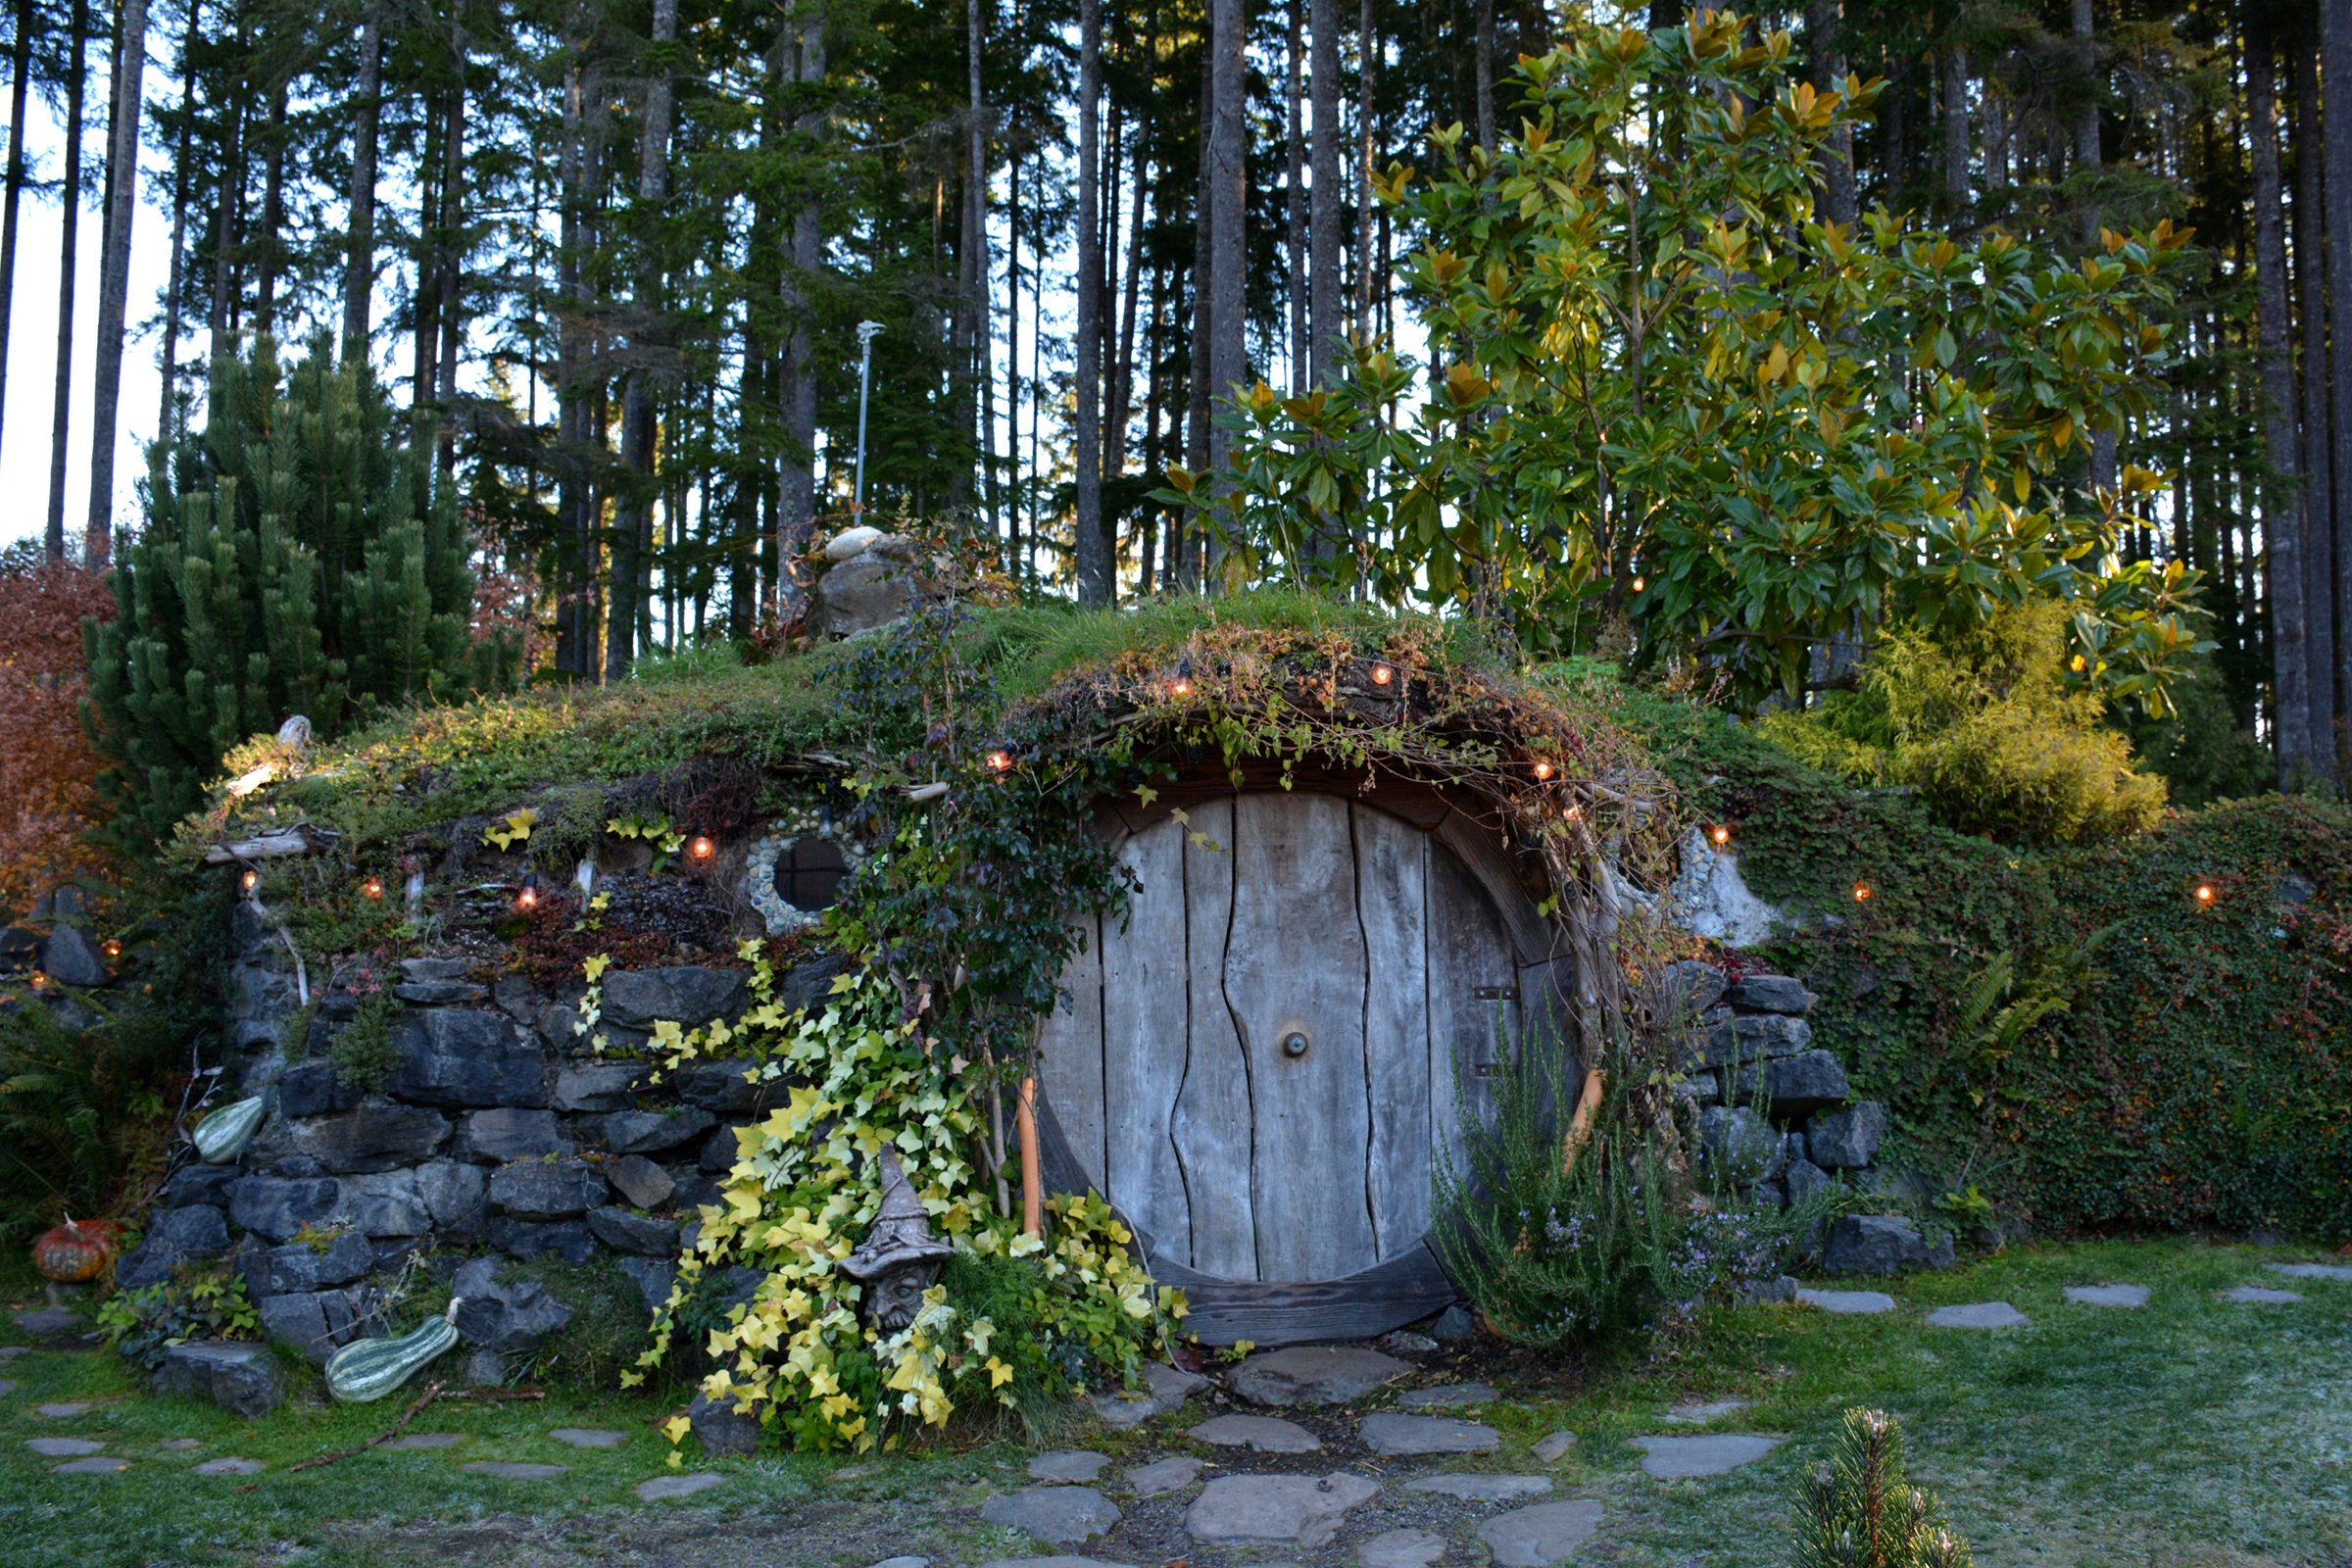  …and obviously brought it along to see a hobbit hole!  